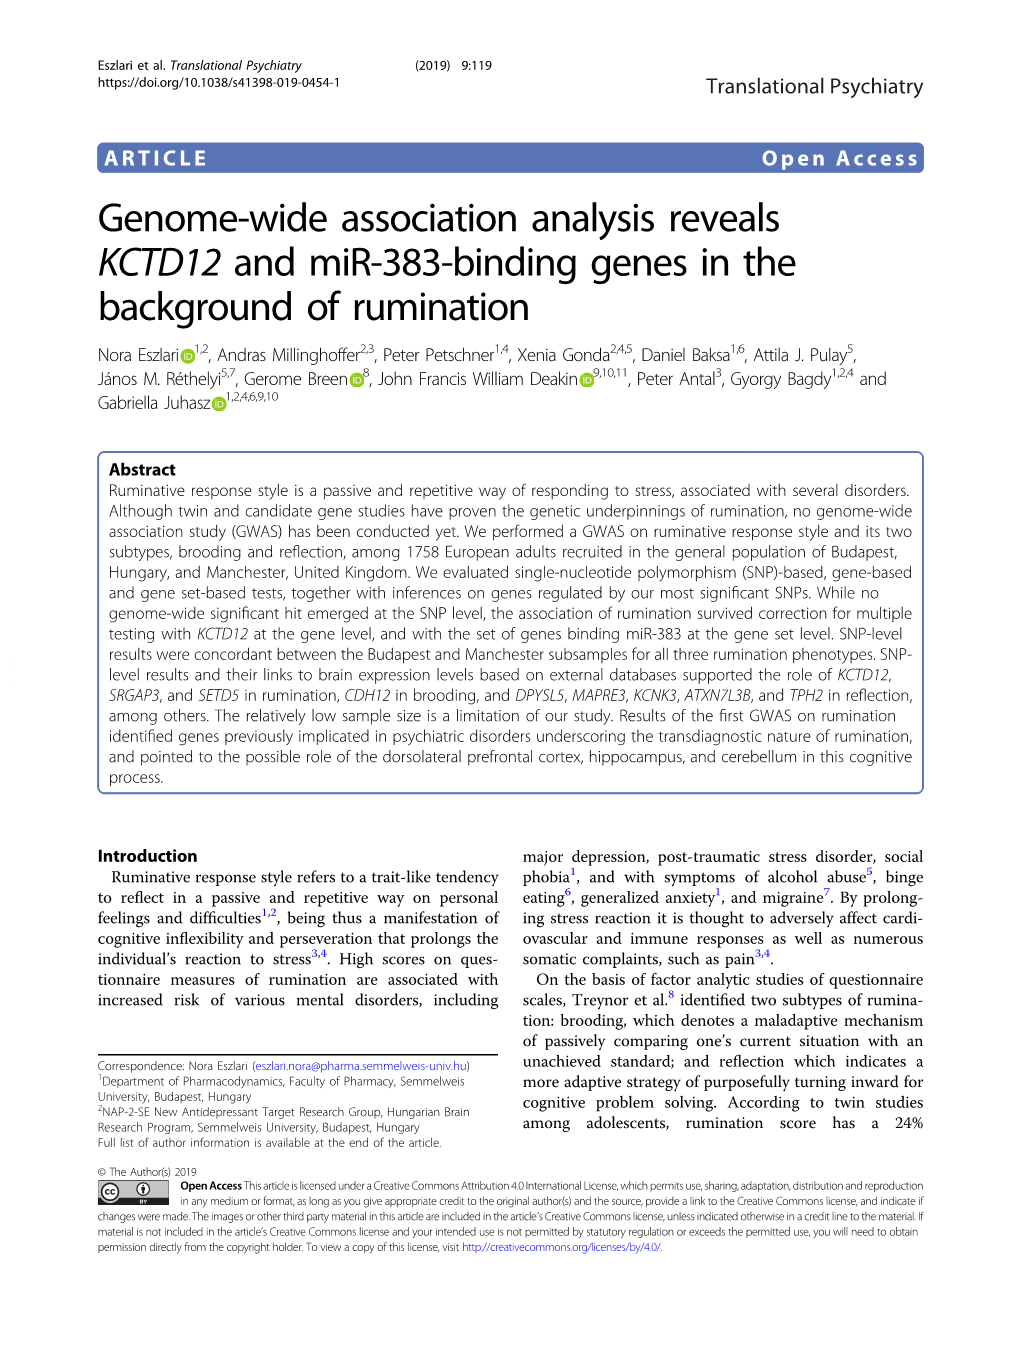 Genome-Wide Association Analysis Reveals KCTD12 and Mir-383